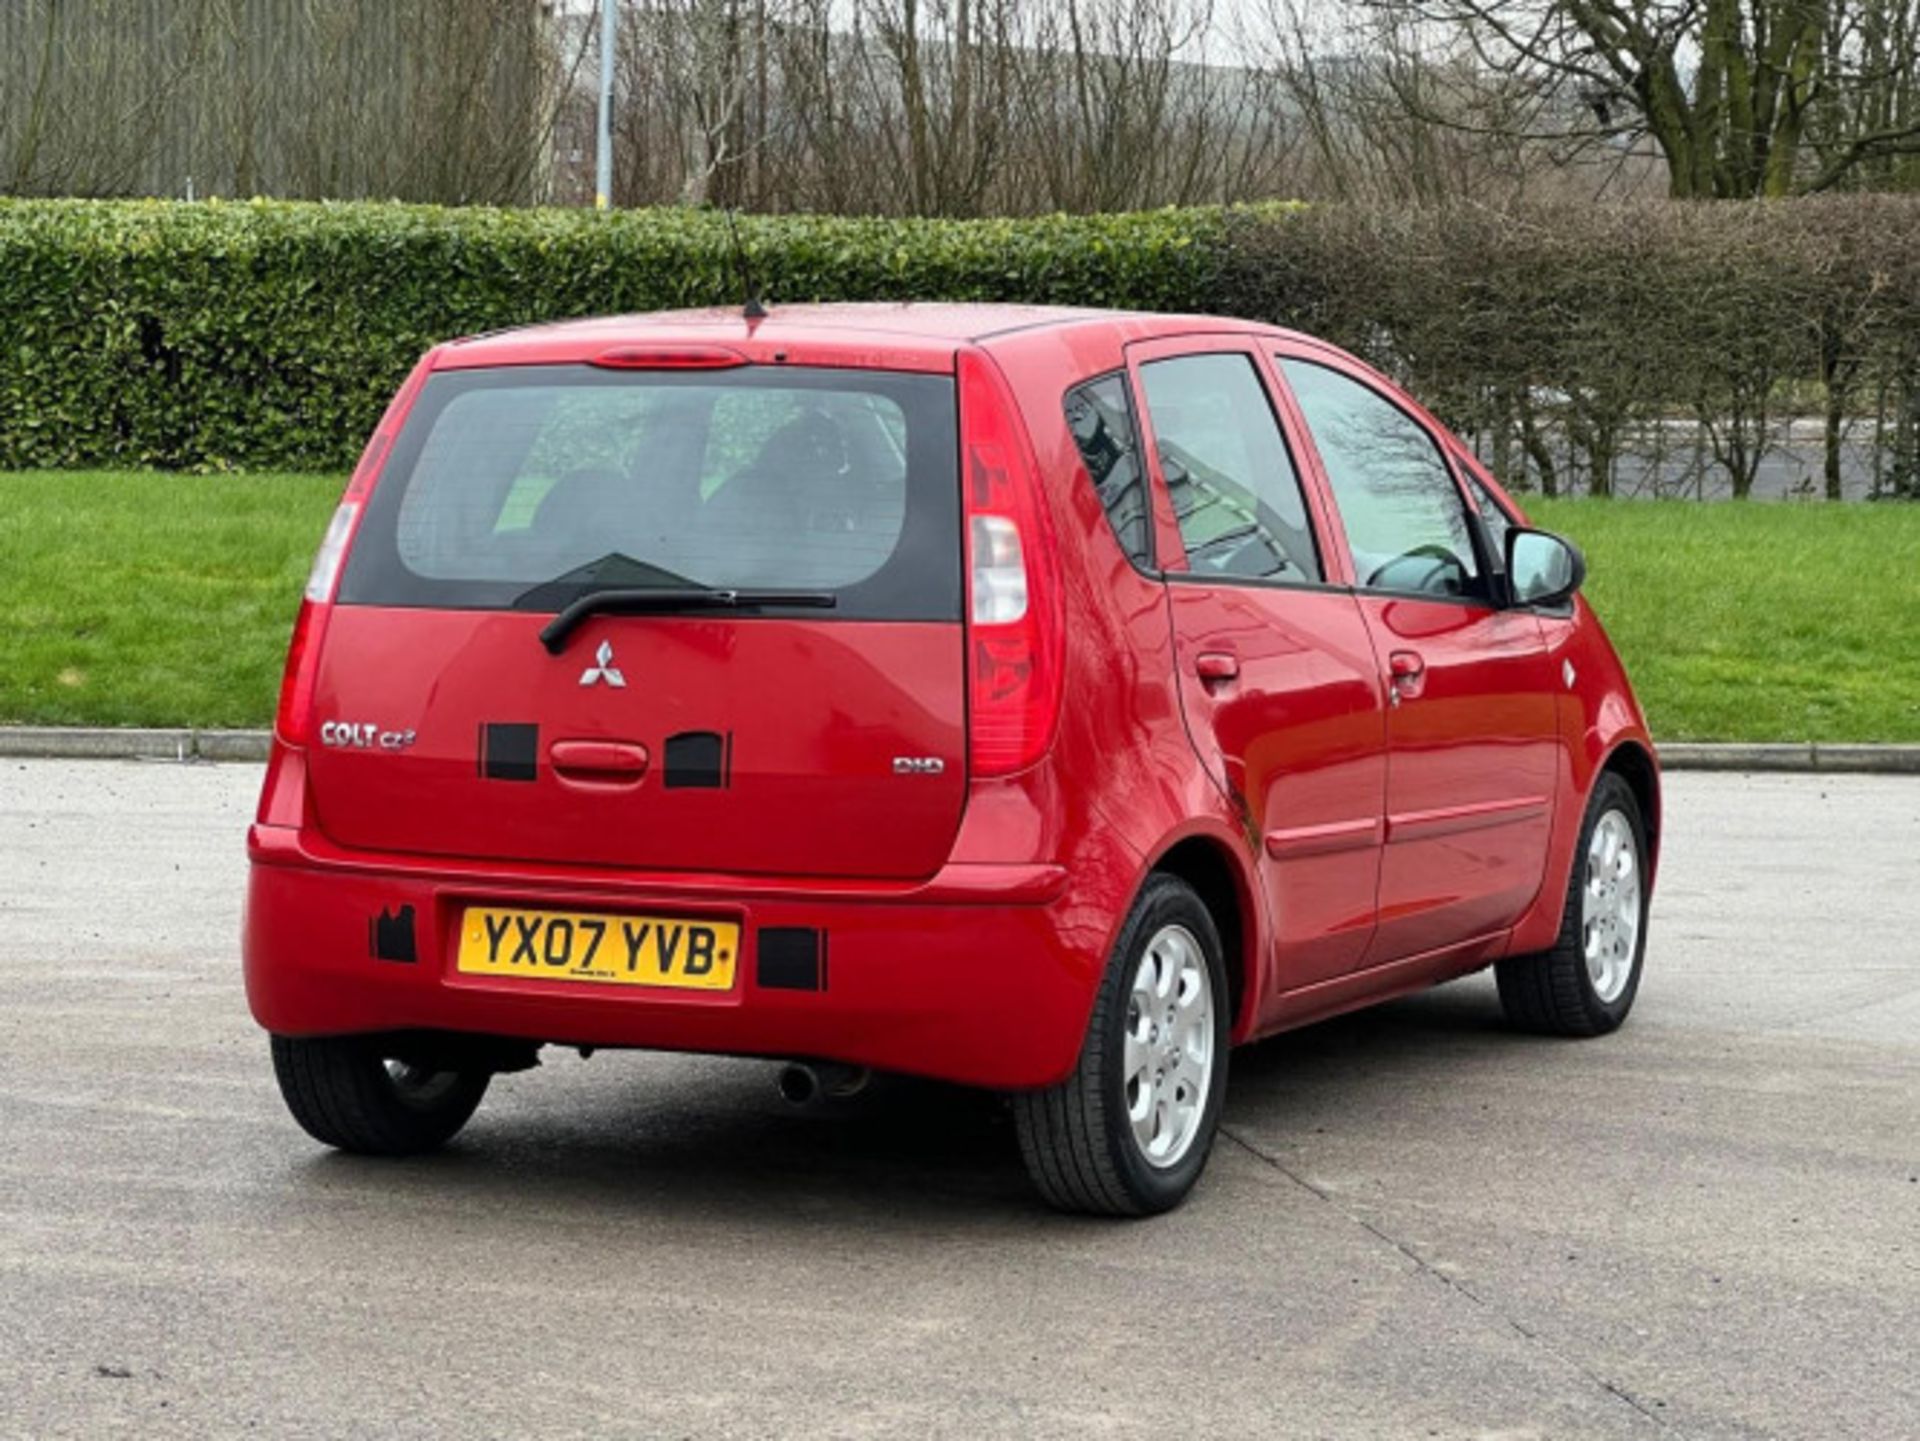 2007 MITSUBISHI COLT 1.5 DI-D DIESEL AUTOMATIC >>--NO VAT ON HAMMER--<< - Image 189 of 191